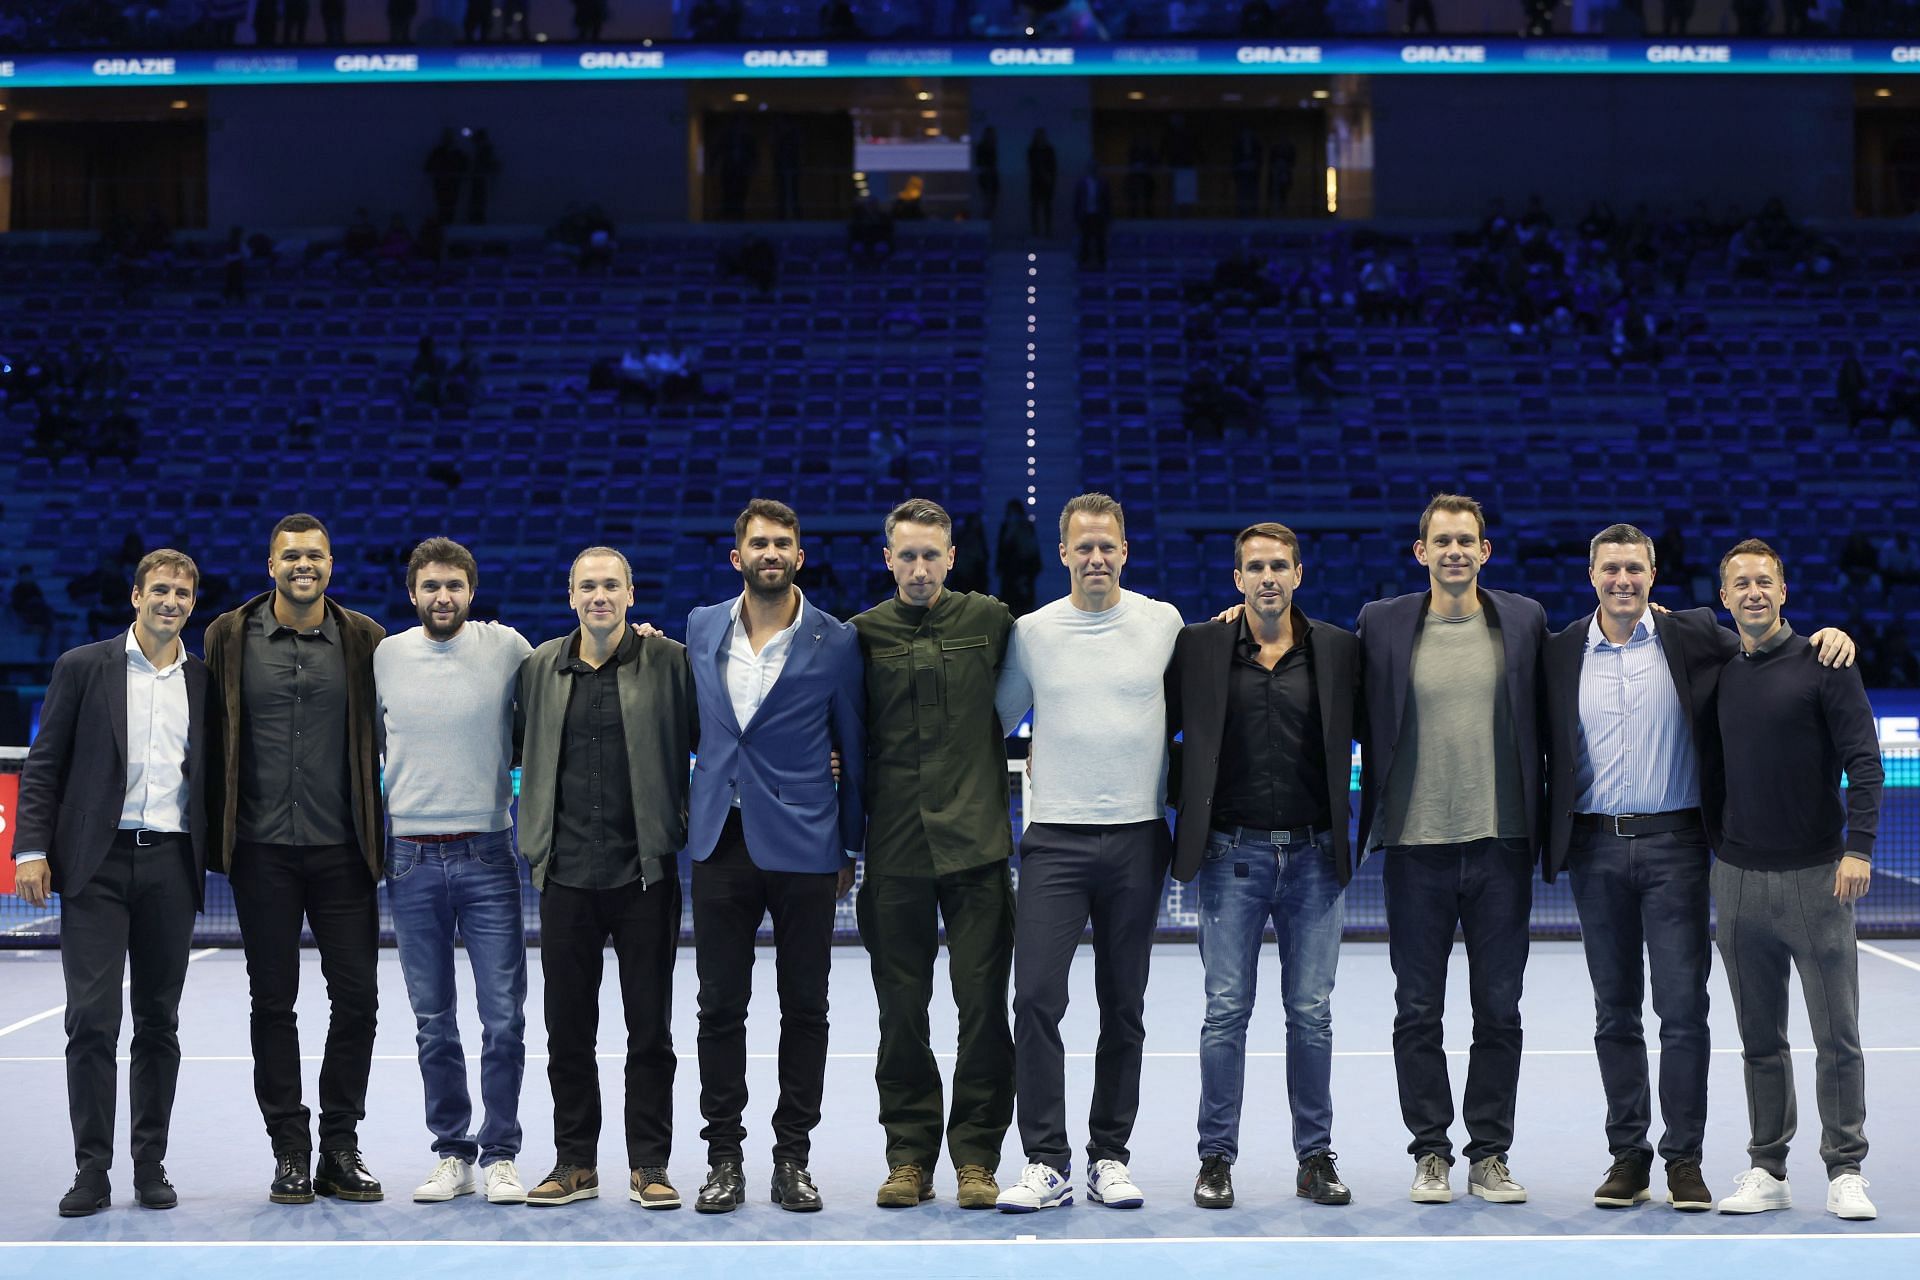 The 11 recently retired stars pose for a photo in Turin.